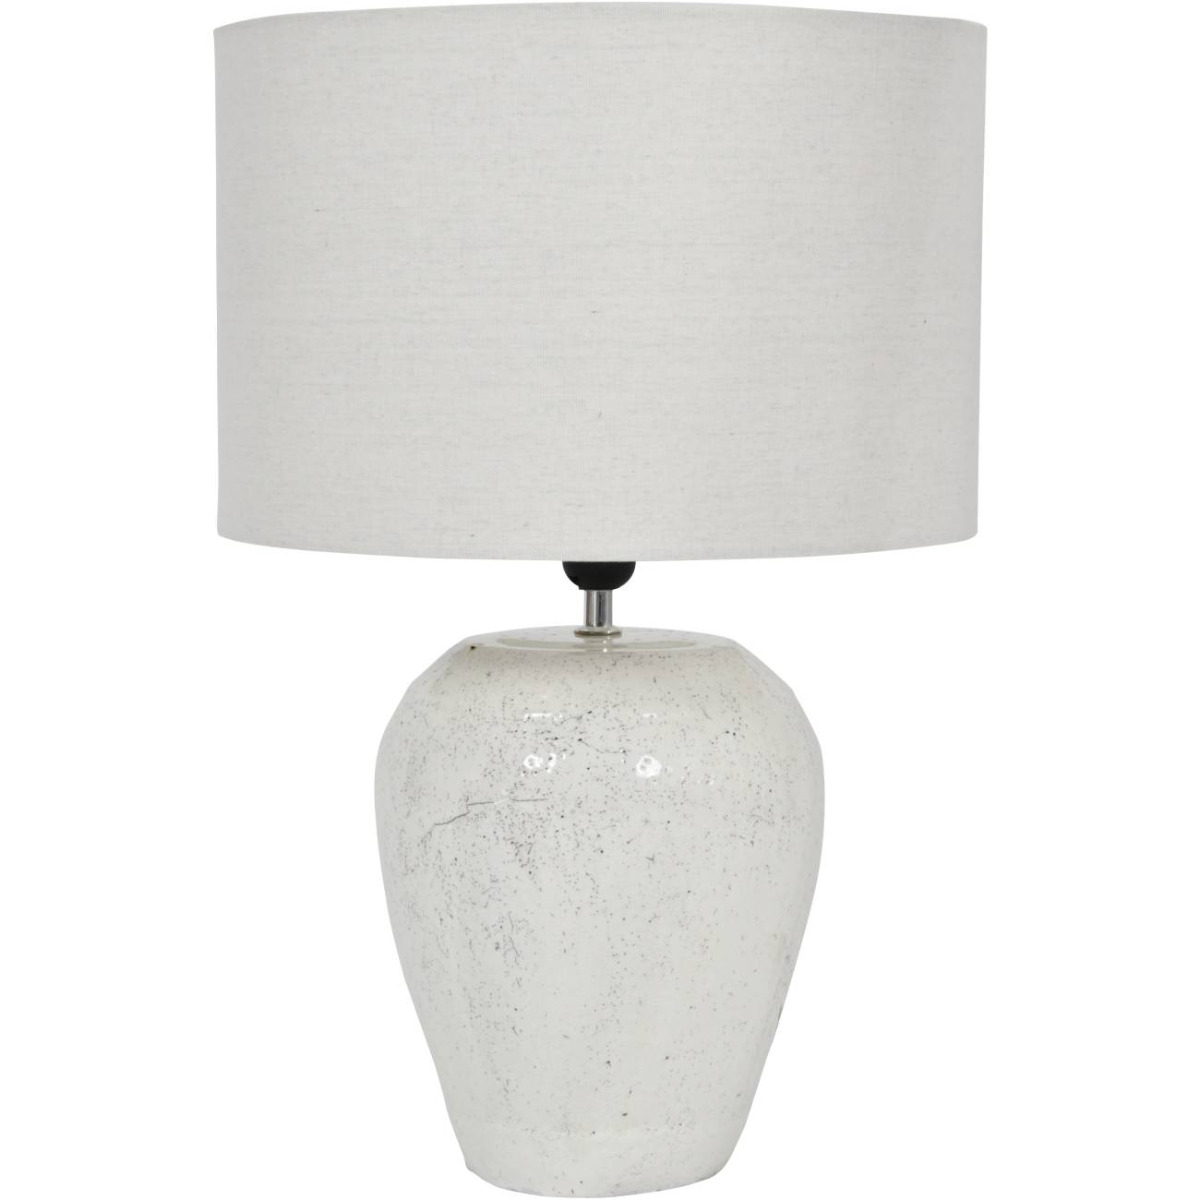 Speckle Terracotta Glazed Table Lamp with Shade